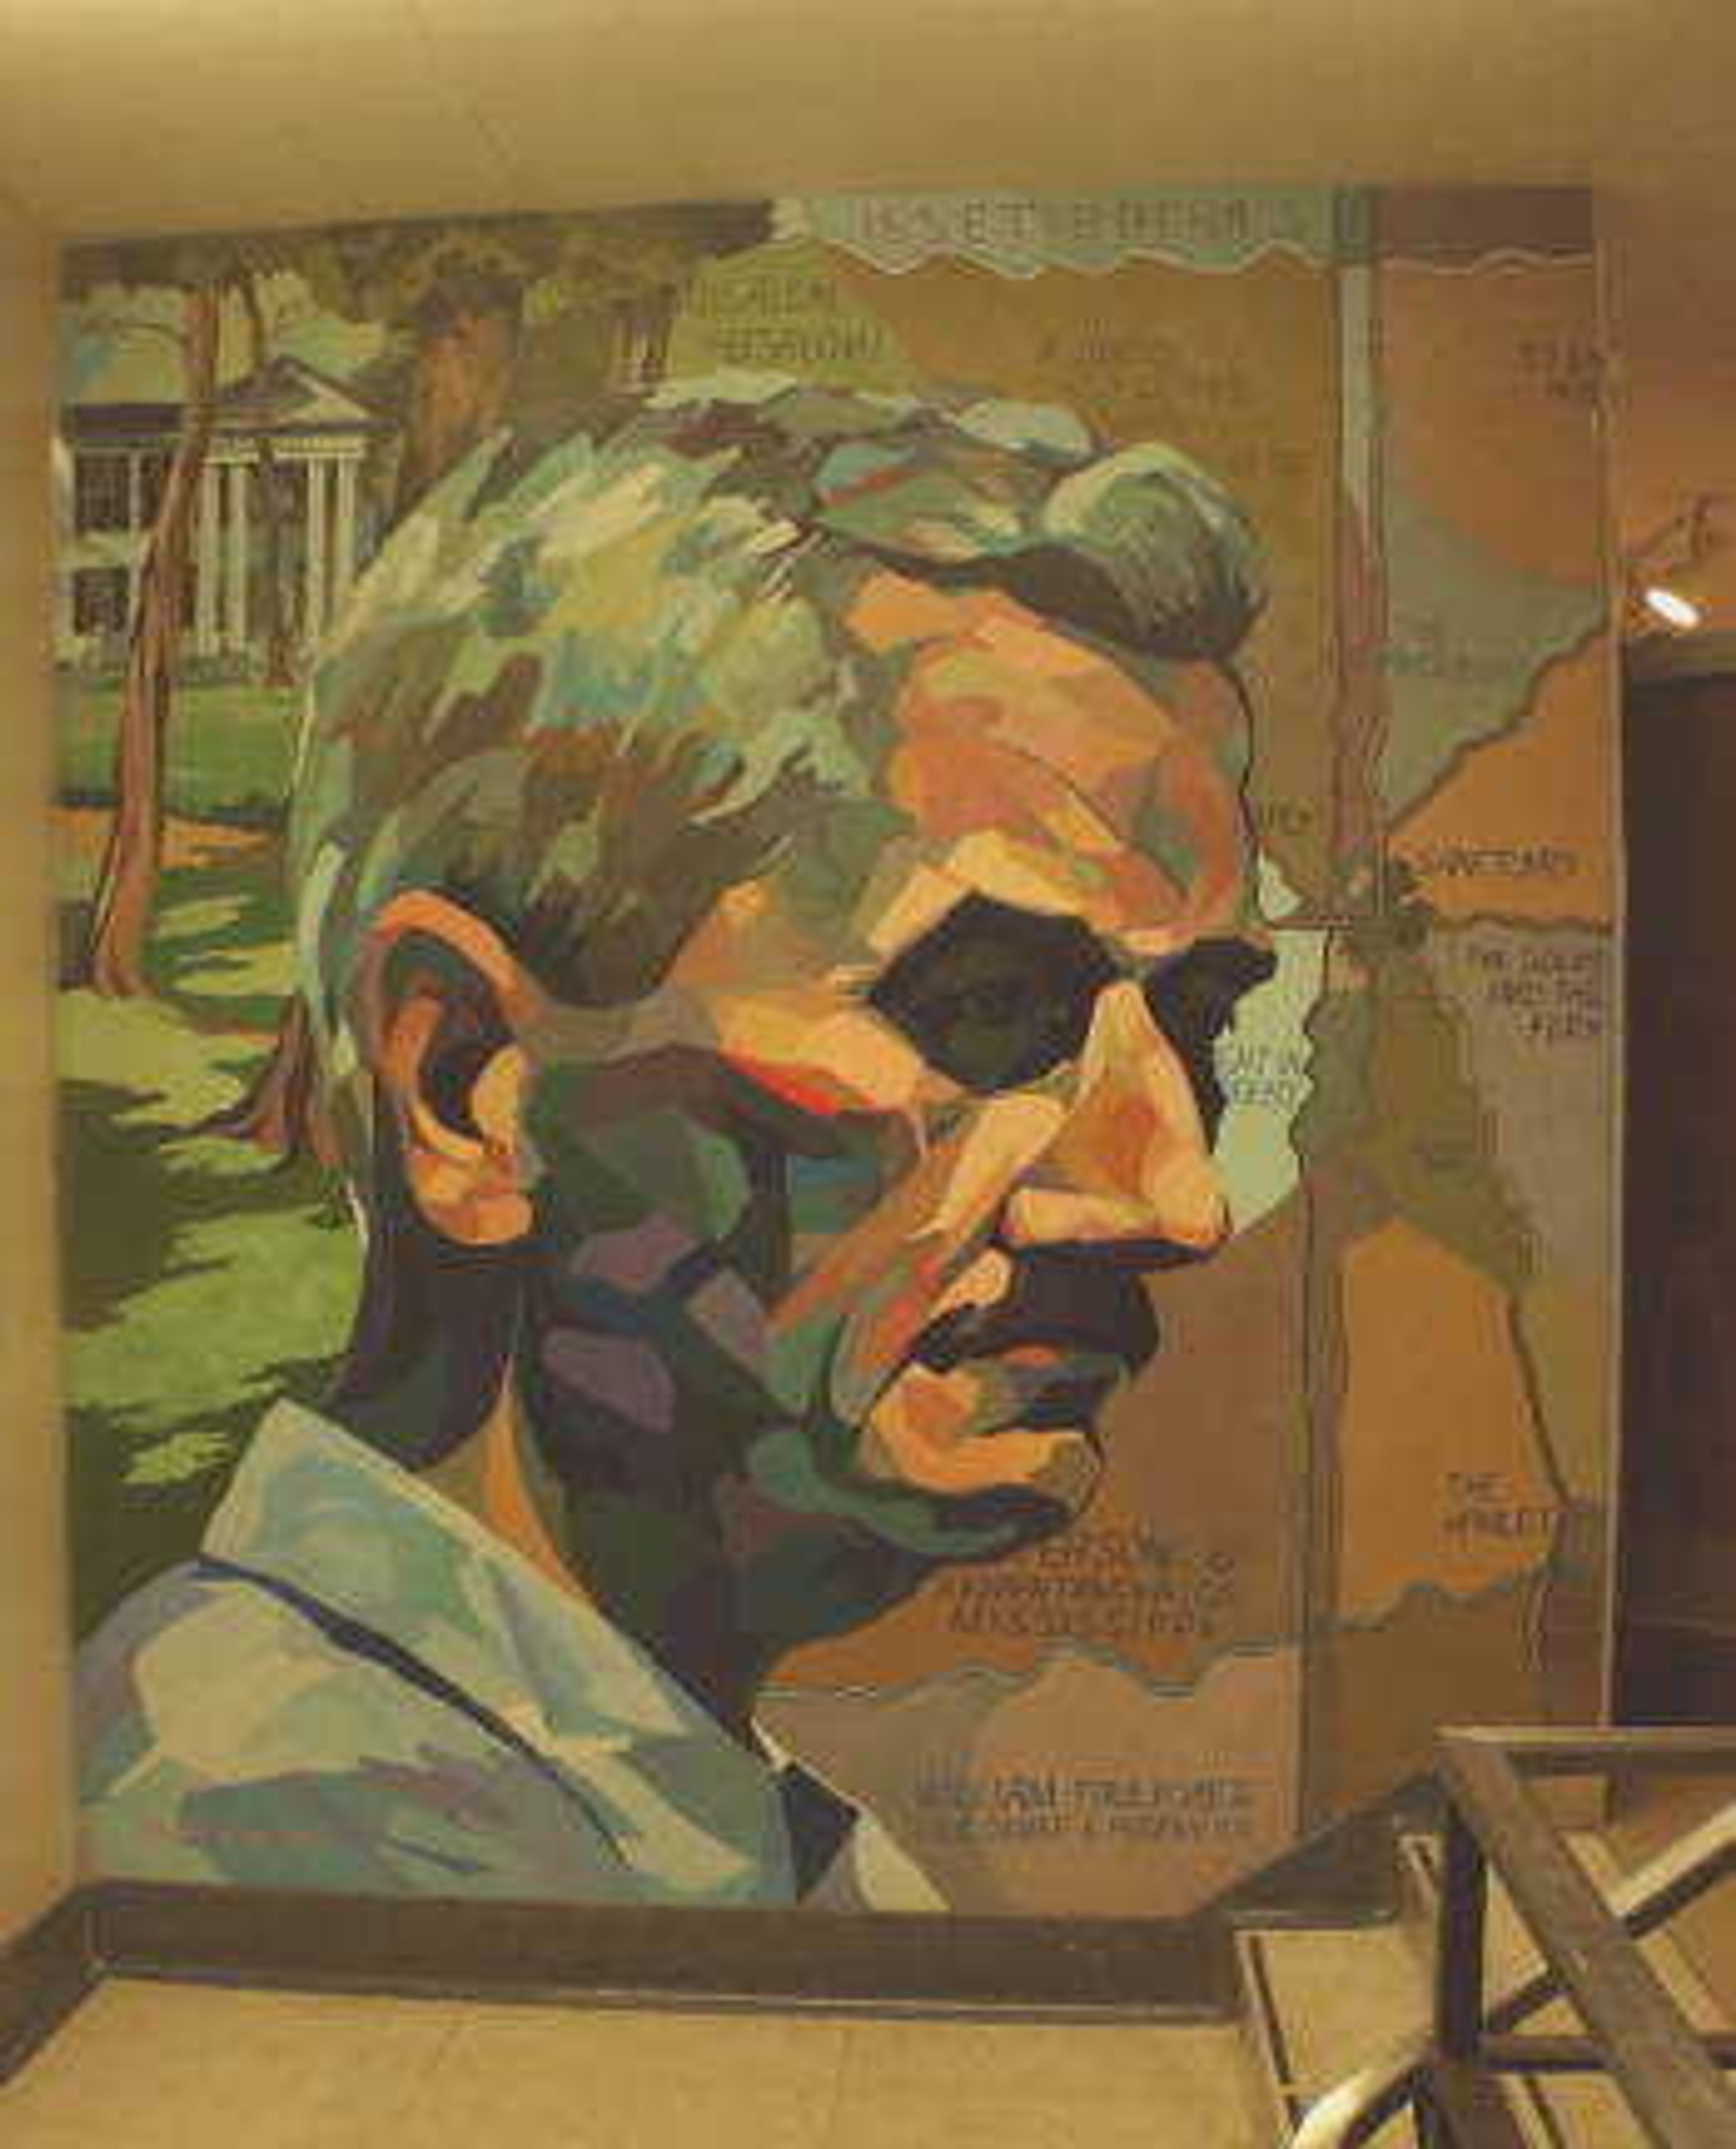 A painting on the wall of Kent Library depicts writer William Faulkner.